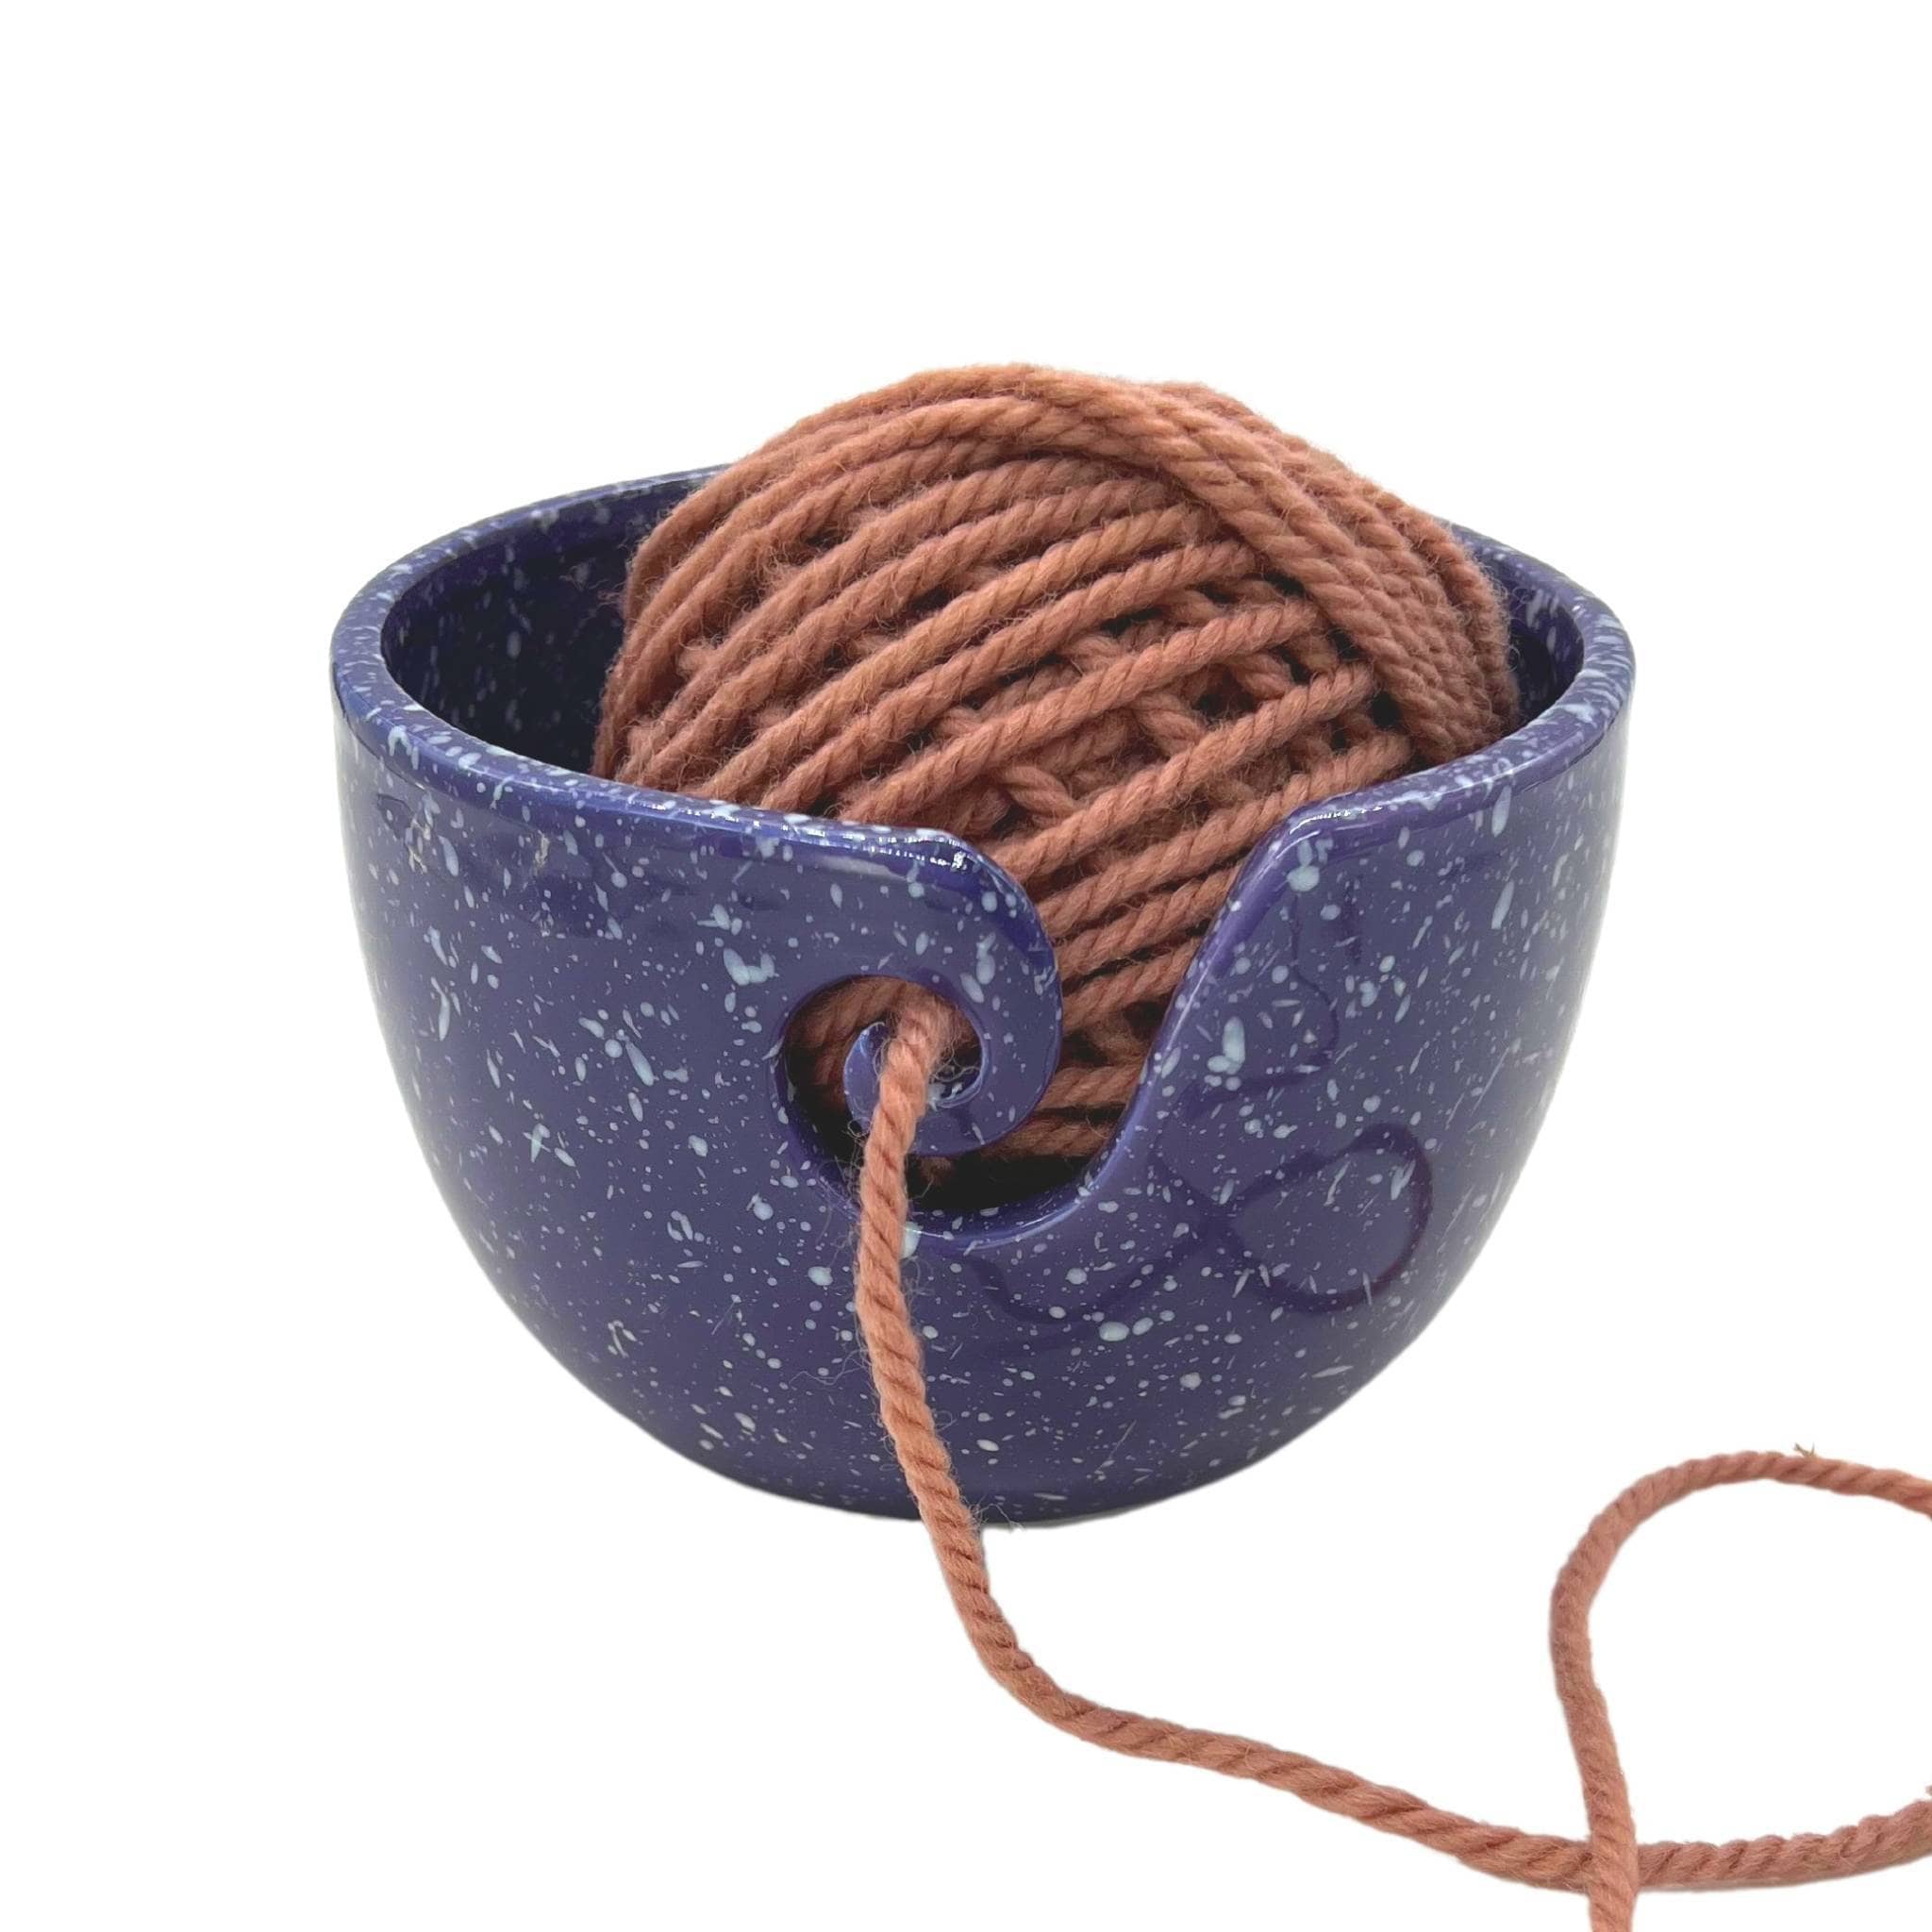 Purple with white speckled ceramic yarn bowl with salmon colored yarn inside of it on a white background 